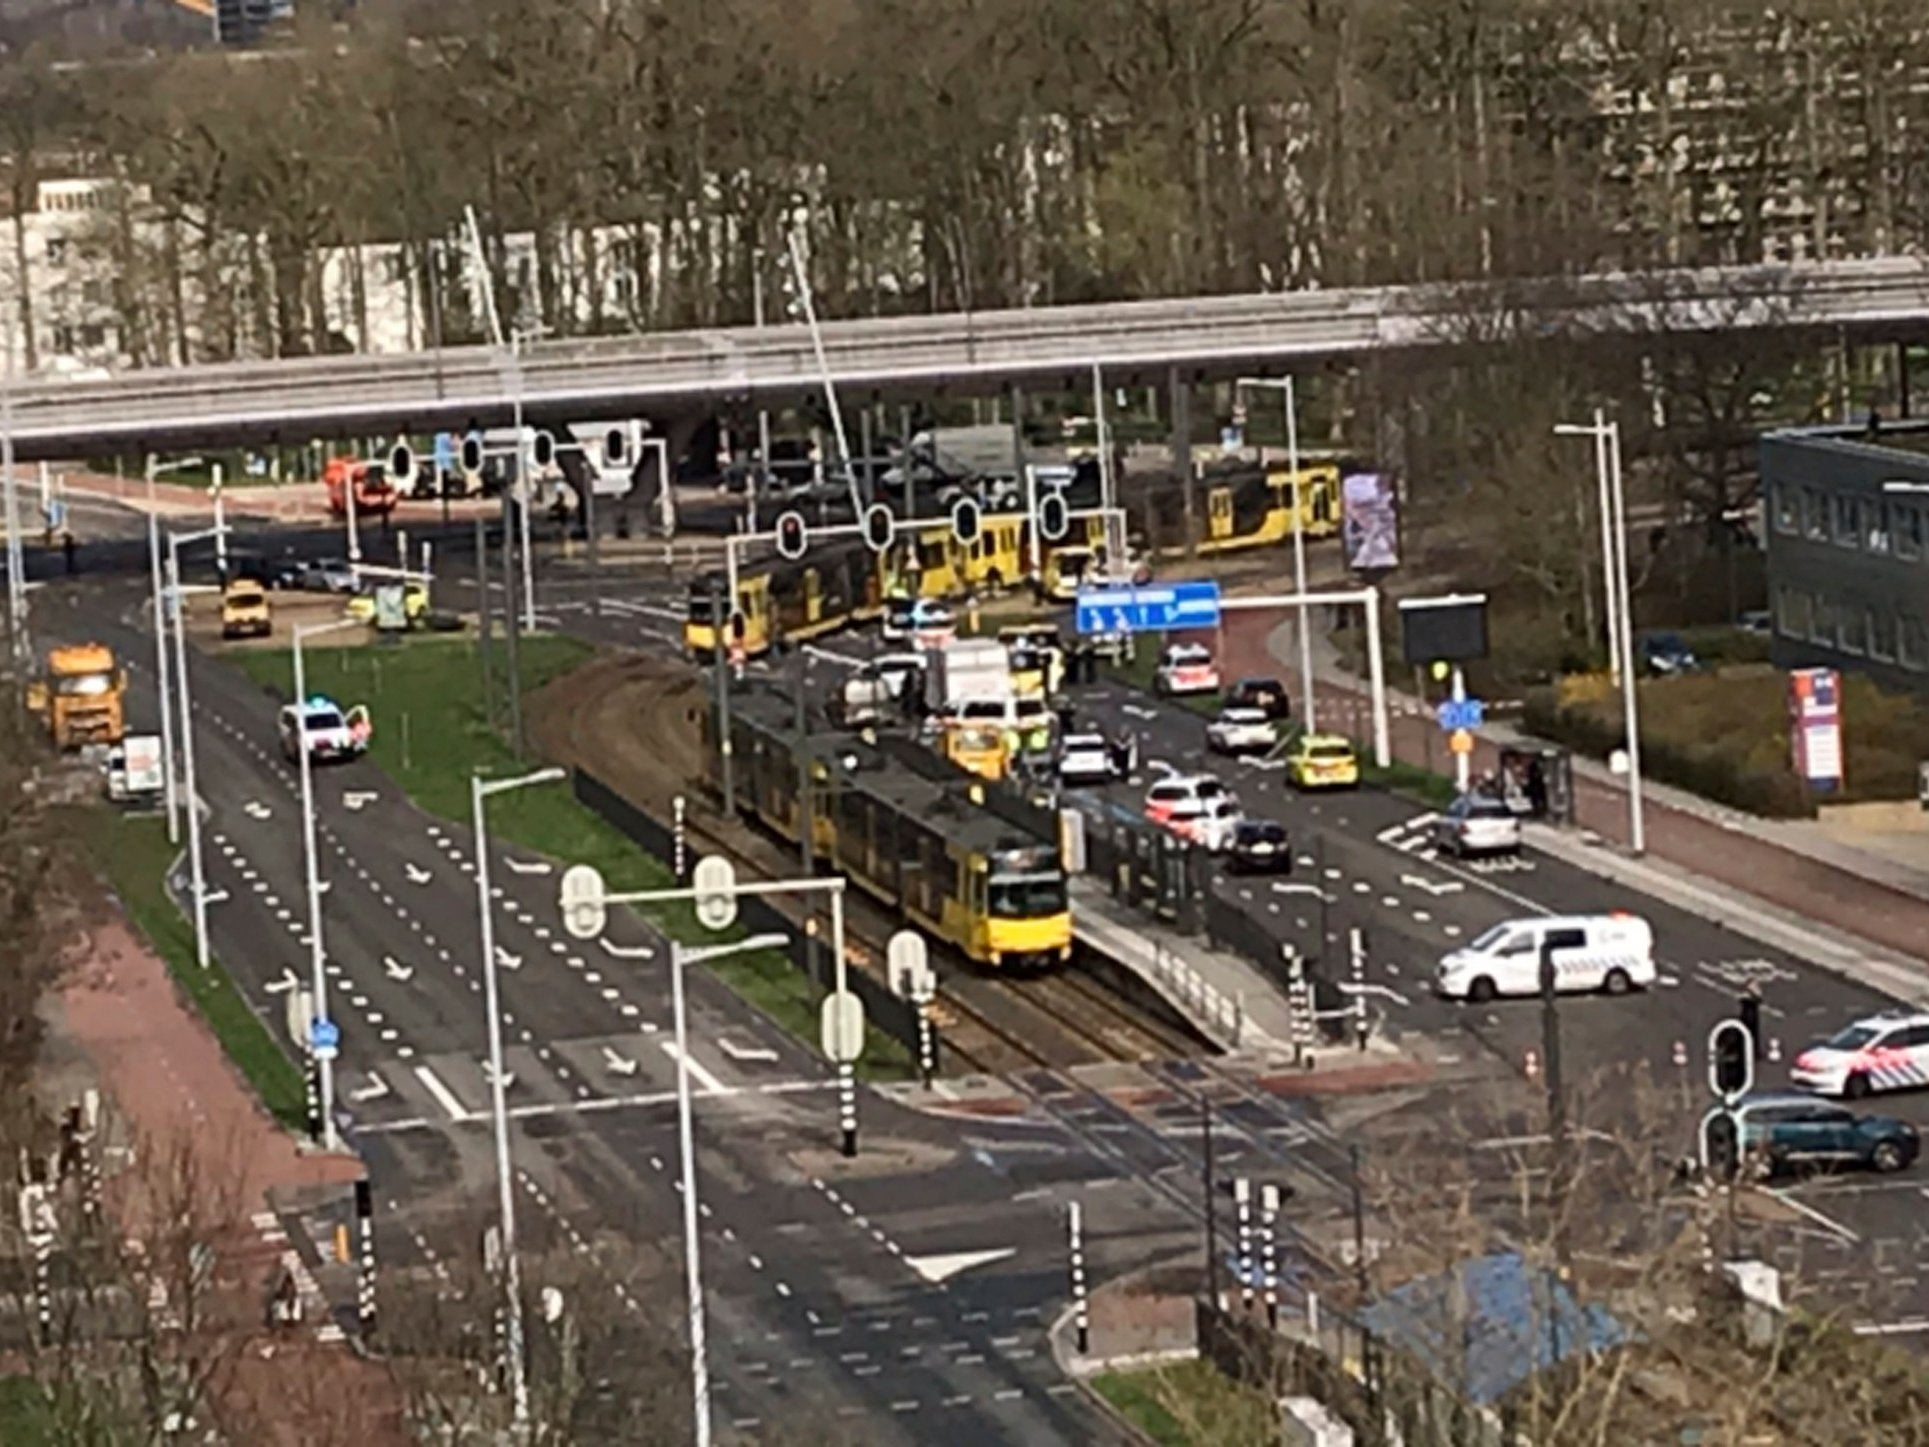 Emergency services attend the scene outside of Utrecht's city centre